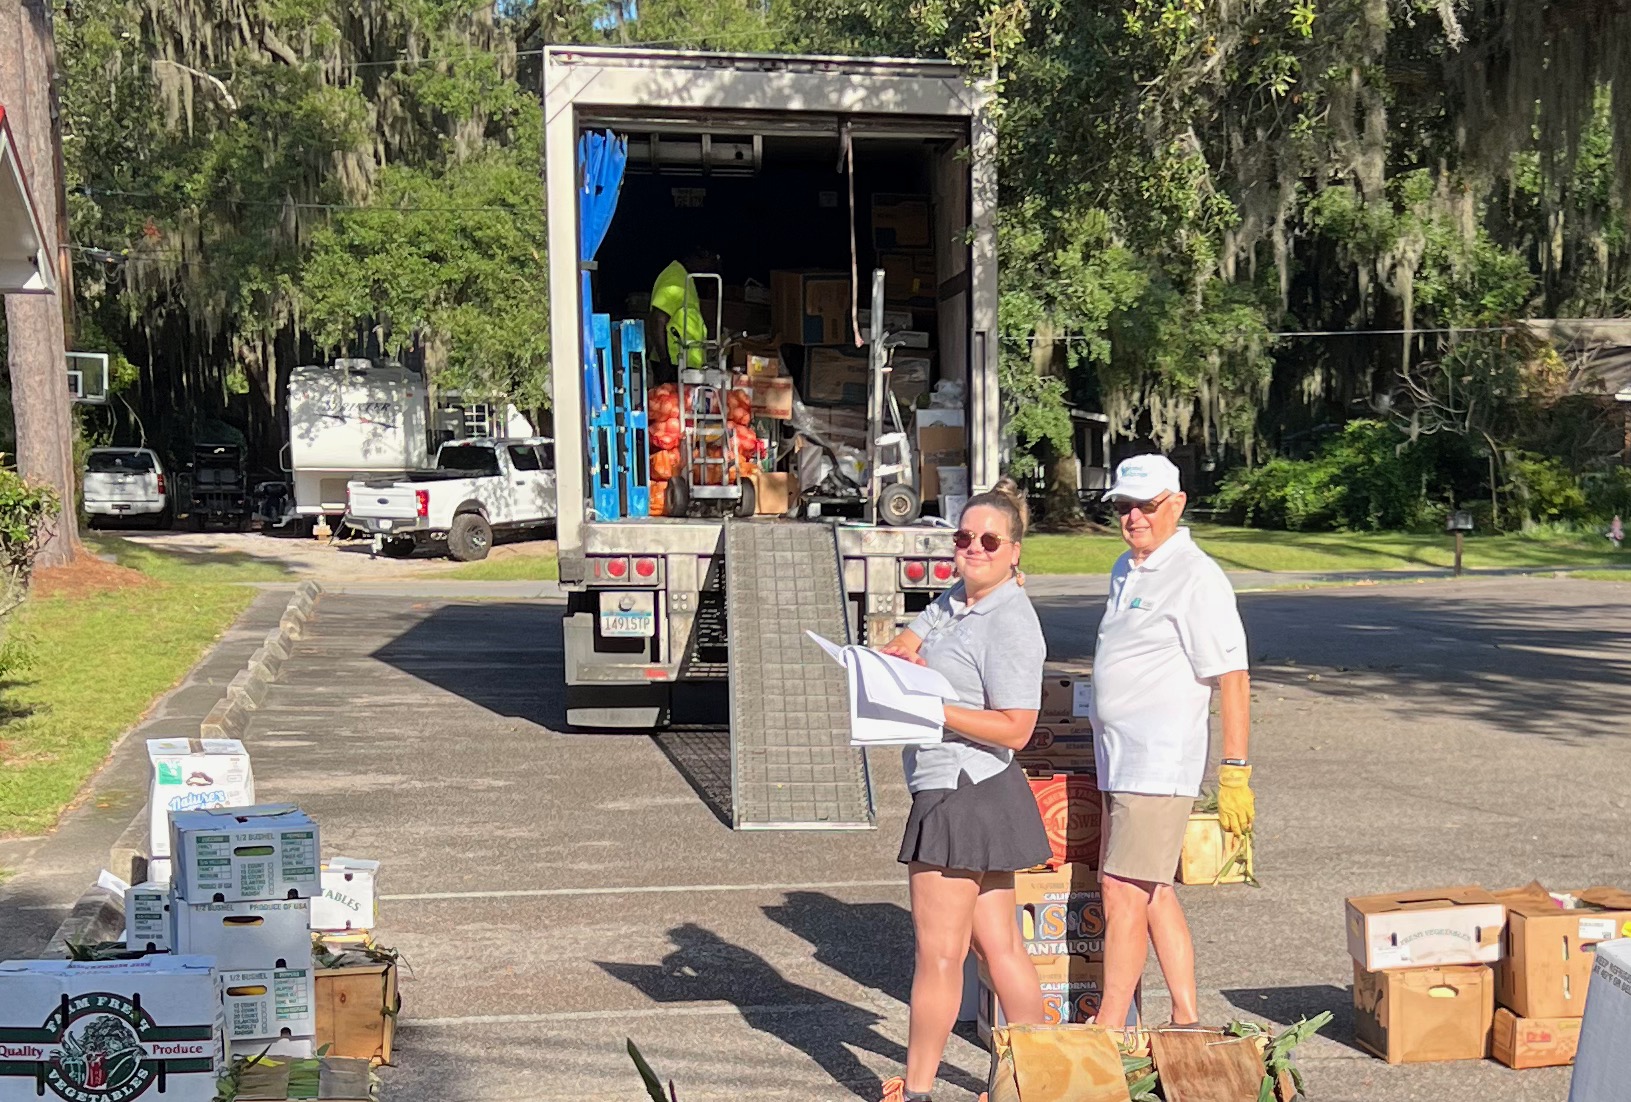 Second Helpings Operations Administrator Leah Long and Board Member Bob Taylor unloading and distributing 5,000 pounds of healthy food for Beaufort-area agencies.